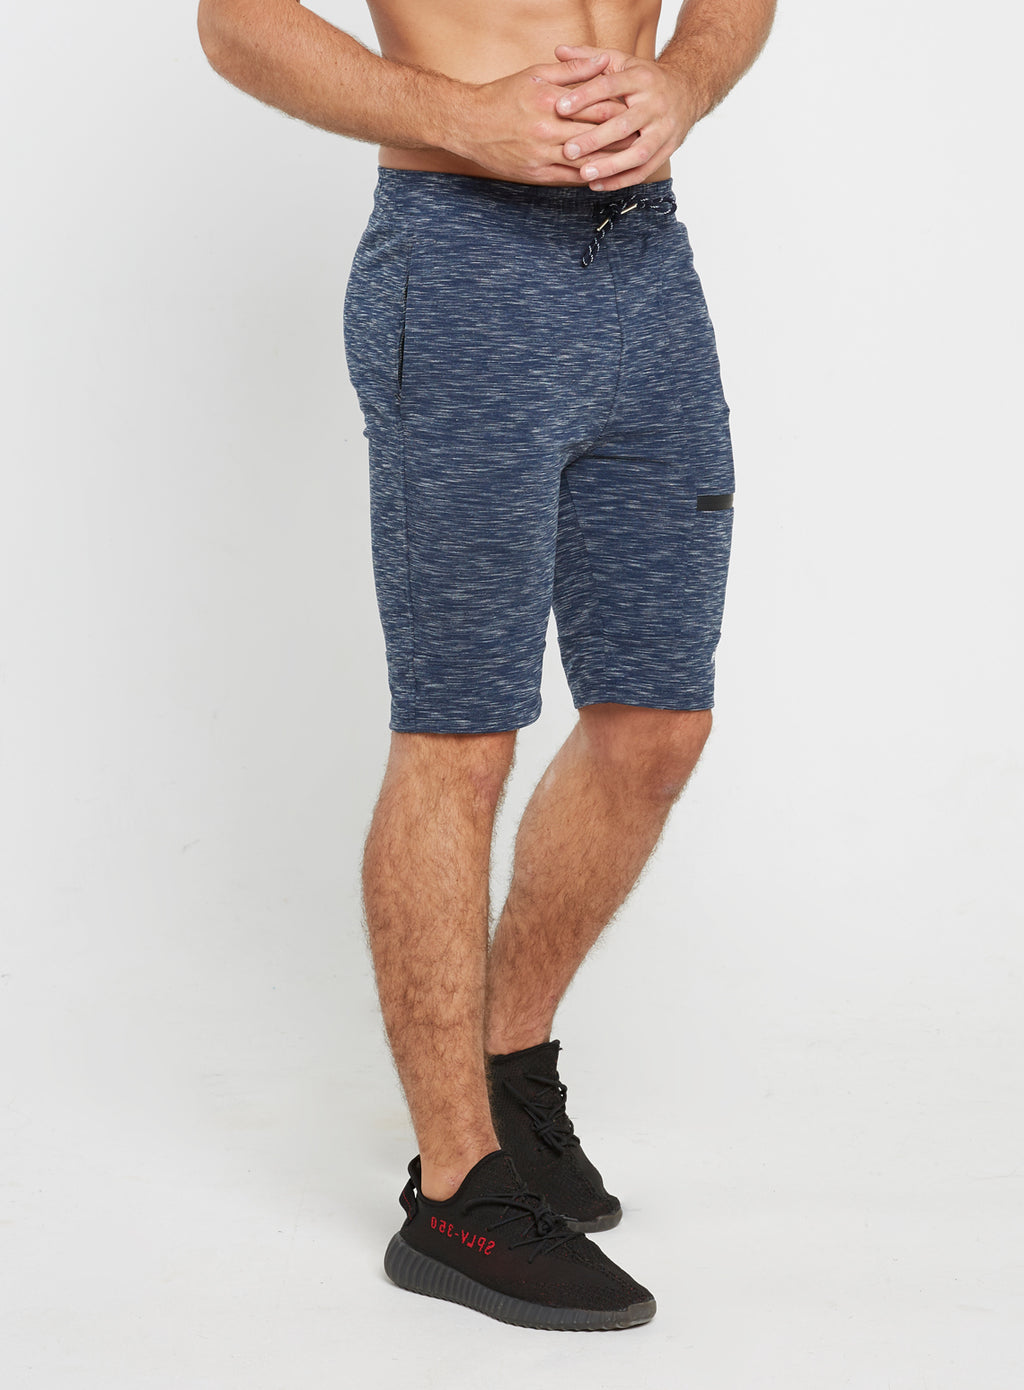 Gym Monkee - Navy Striped Shorts MOVING